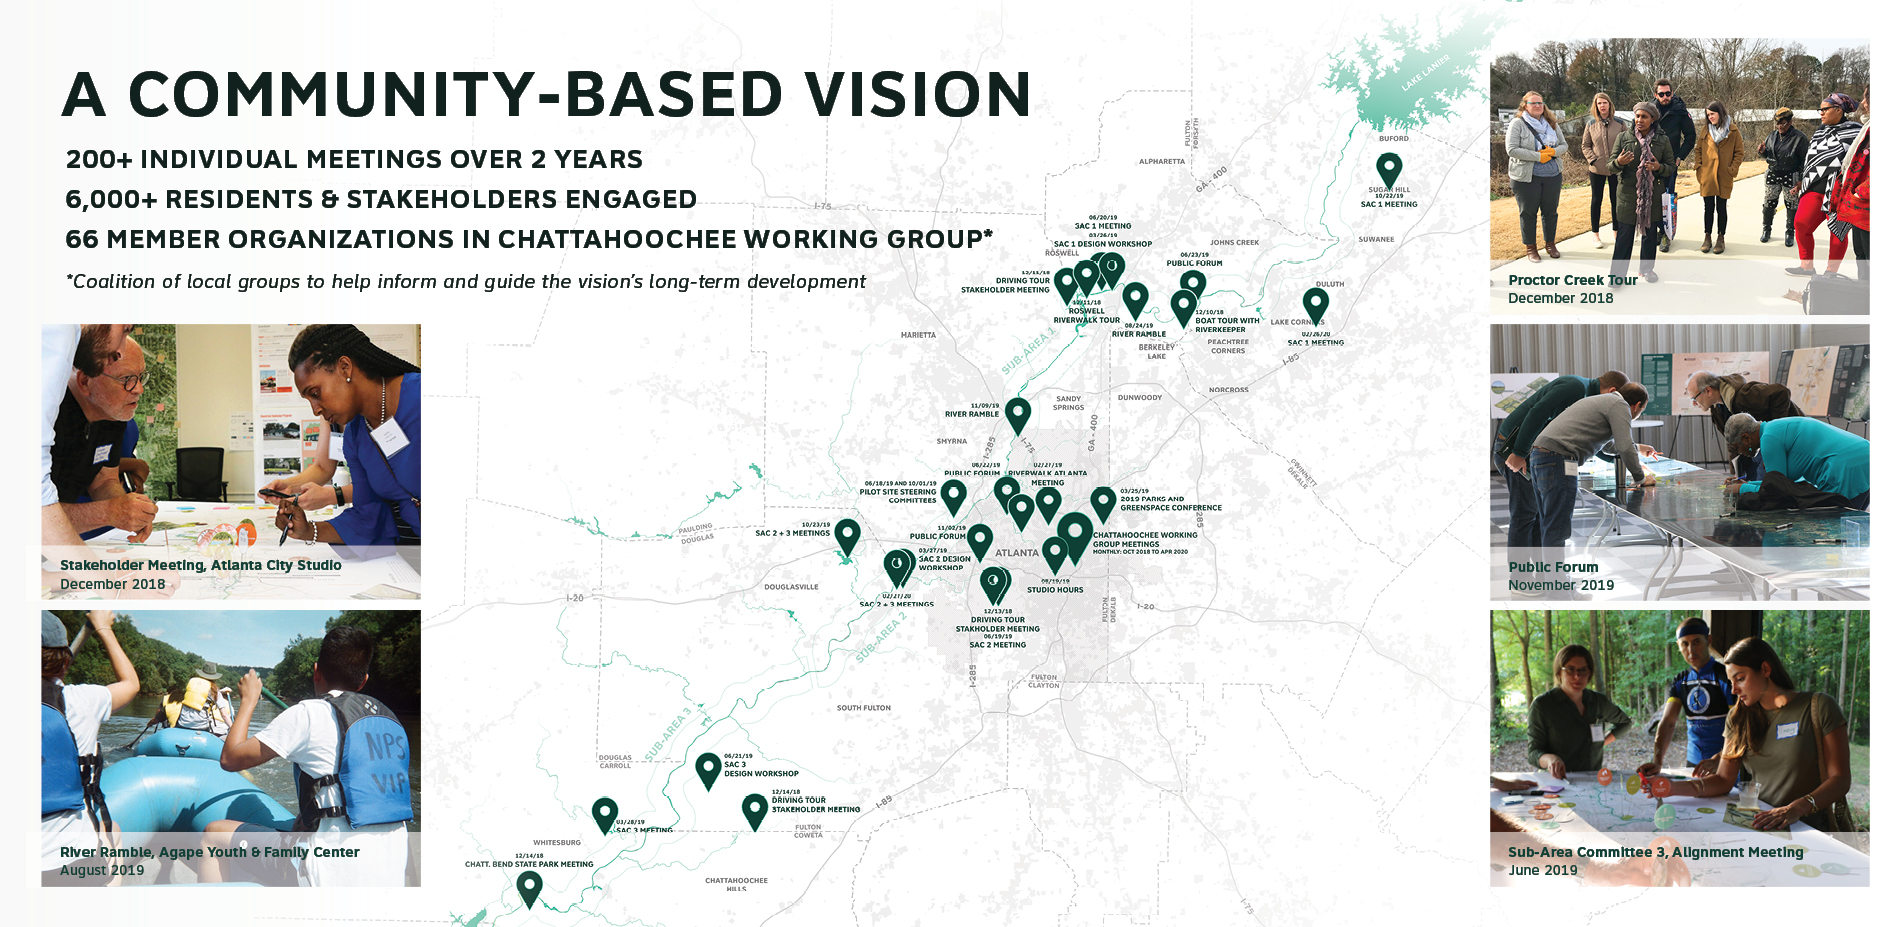 A Community-Based Vision